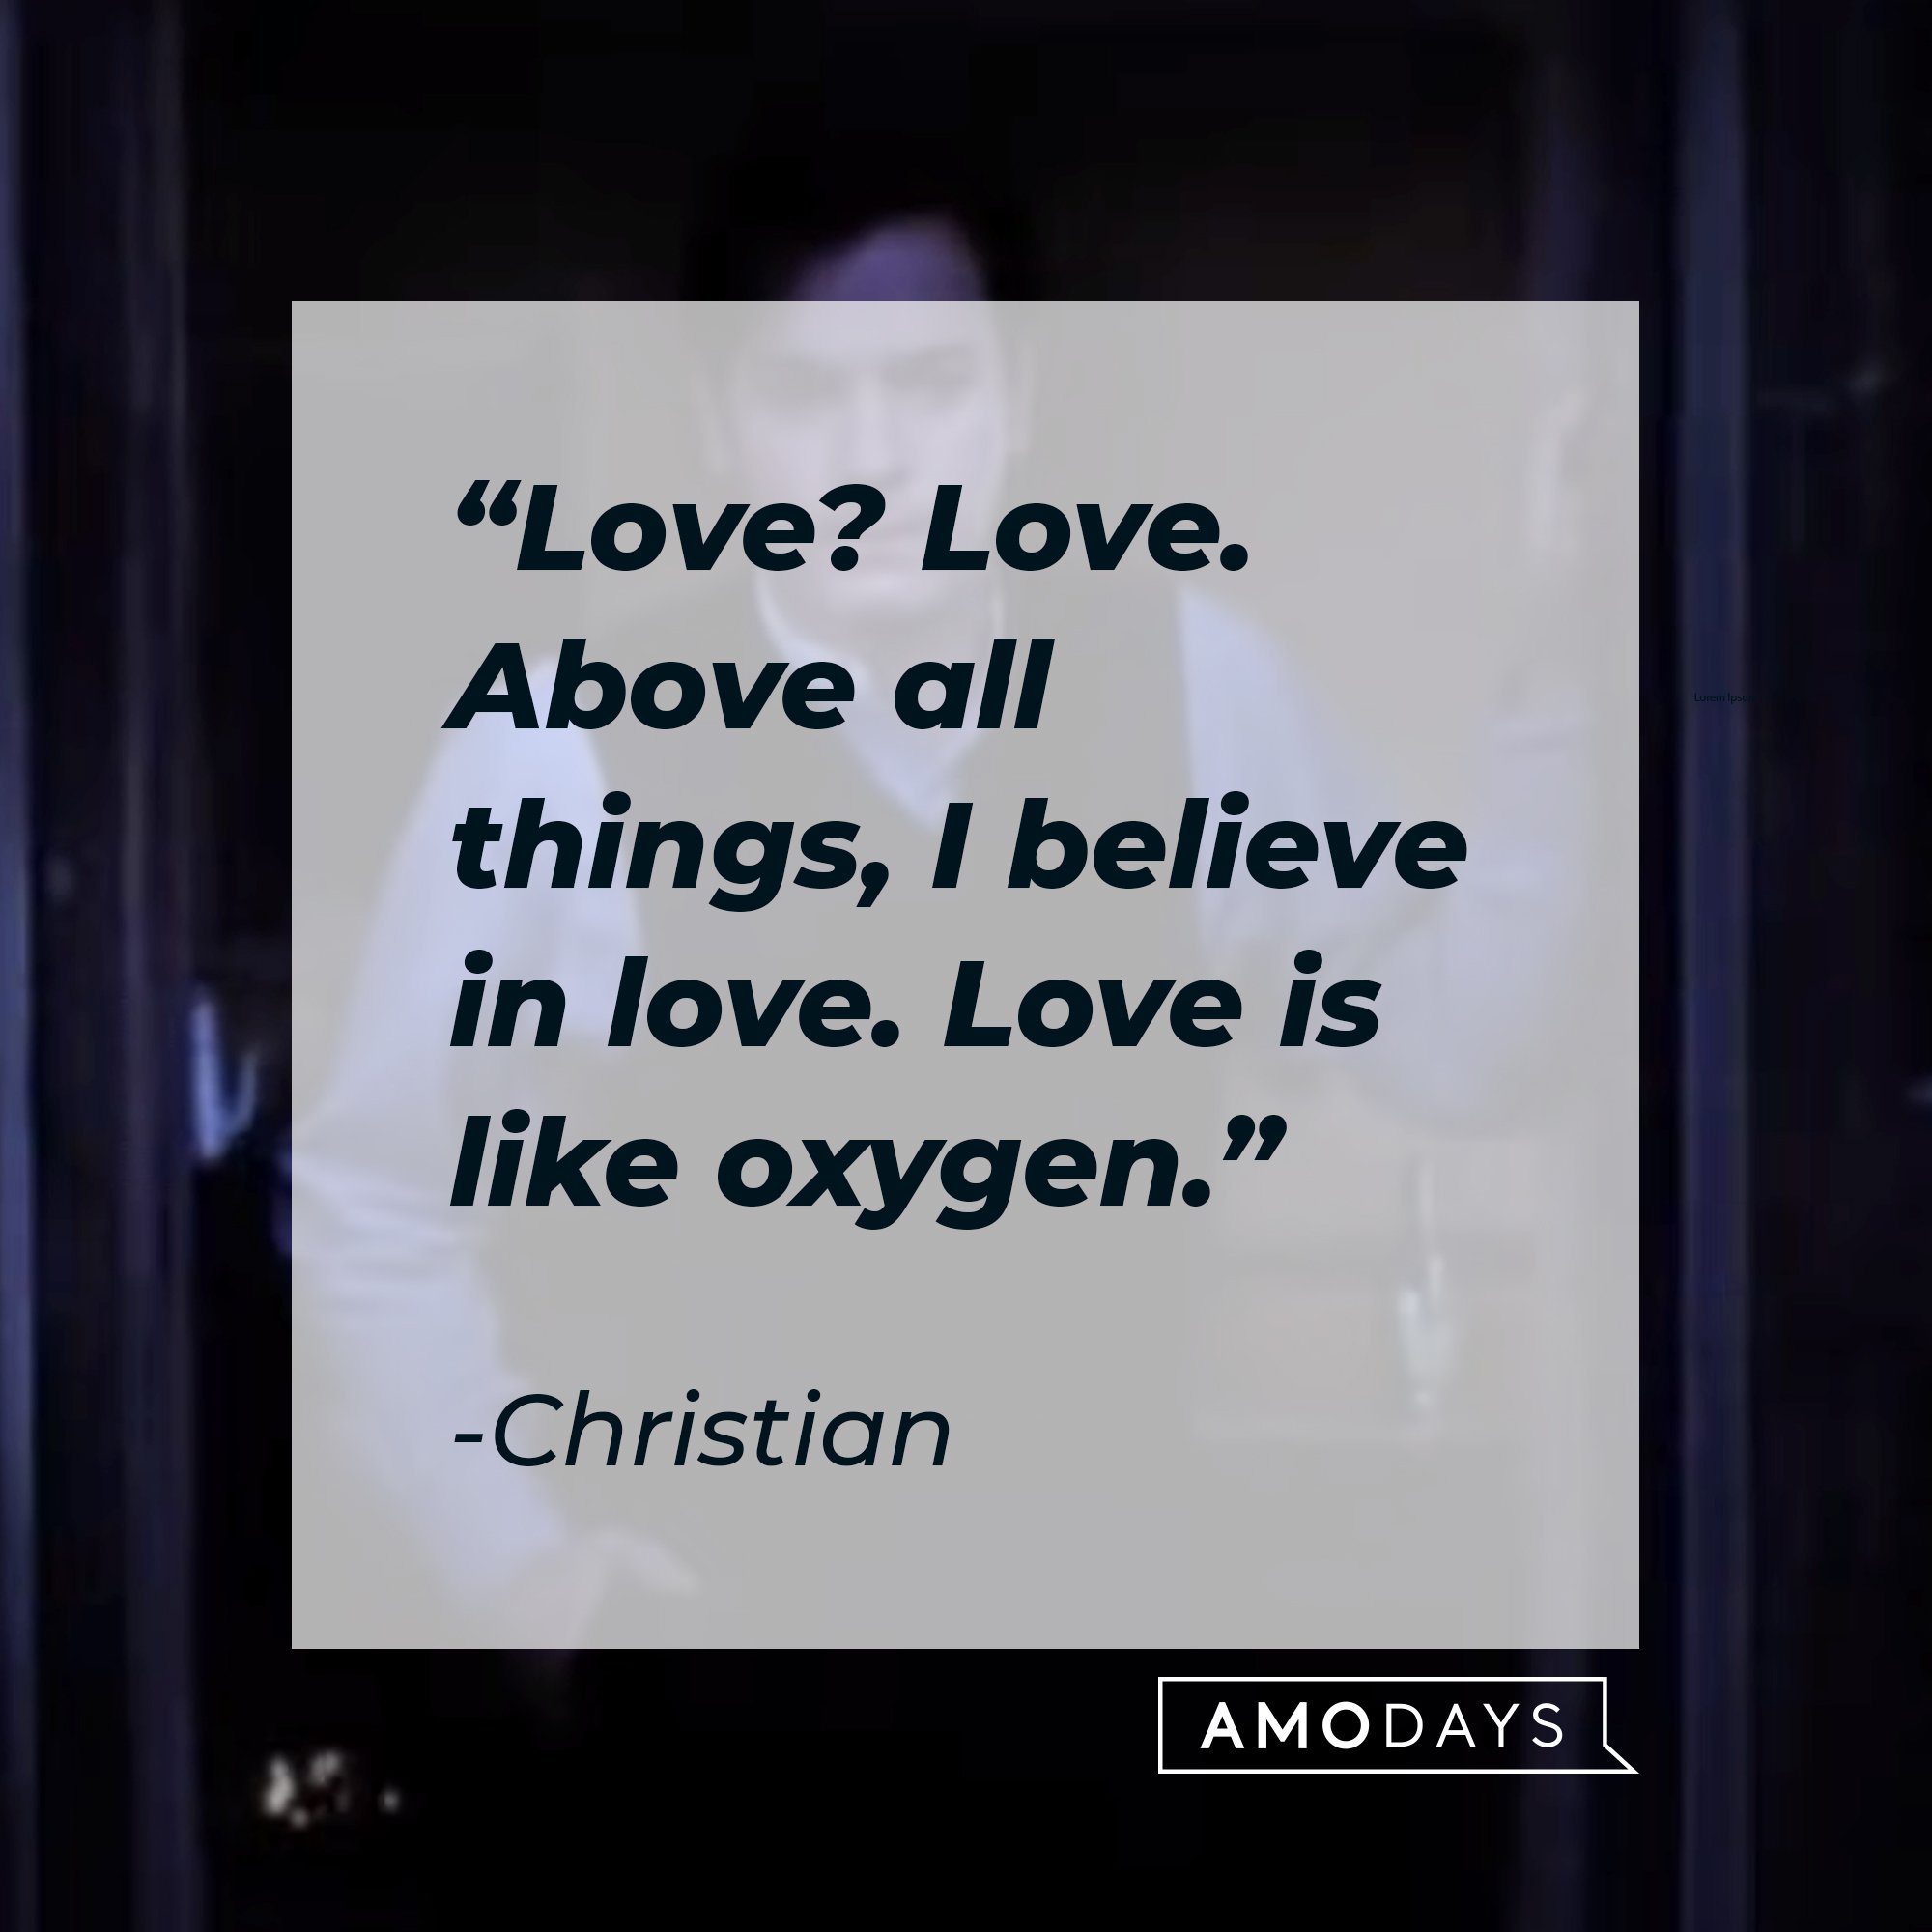   Christian's quote: "Love? Love. Above all things, I believe in love. Love is like oxygen."  | Image: AmoDays